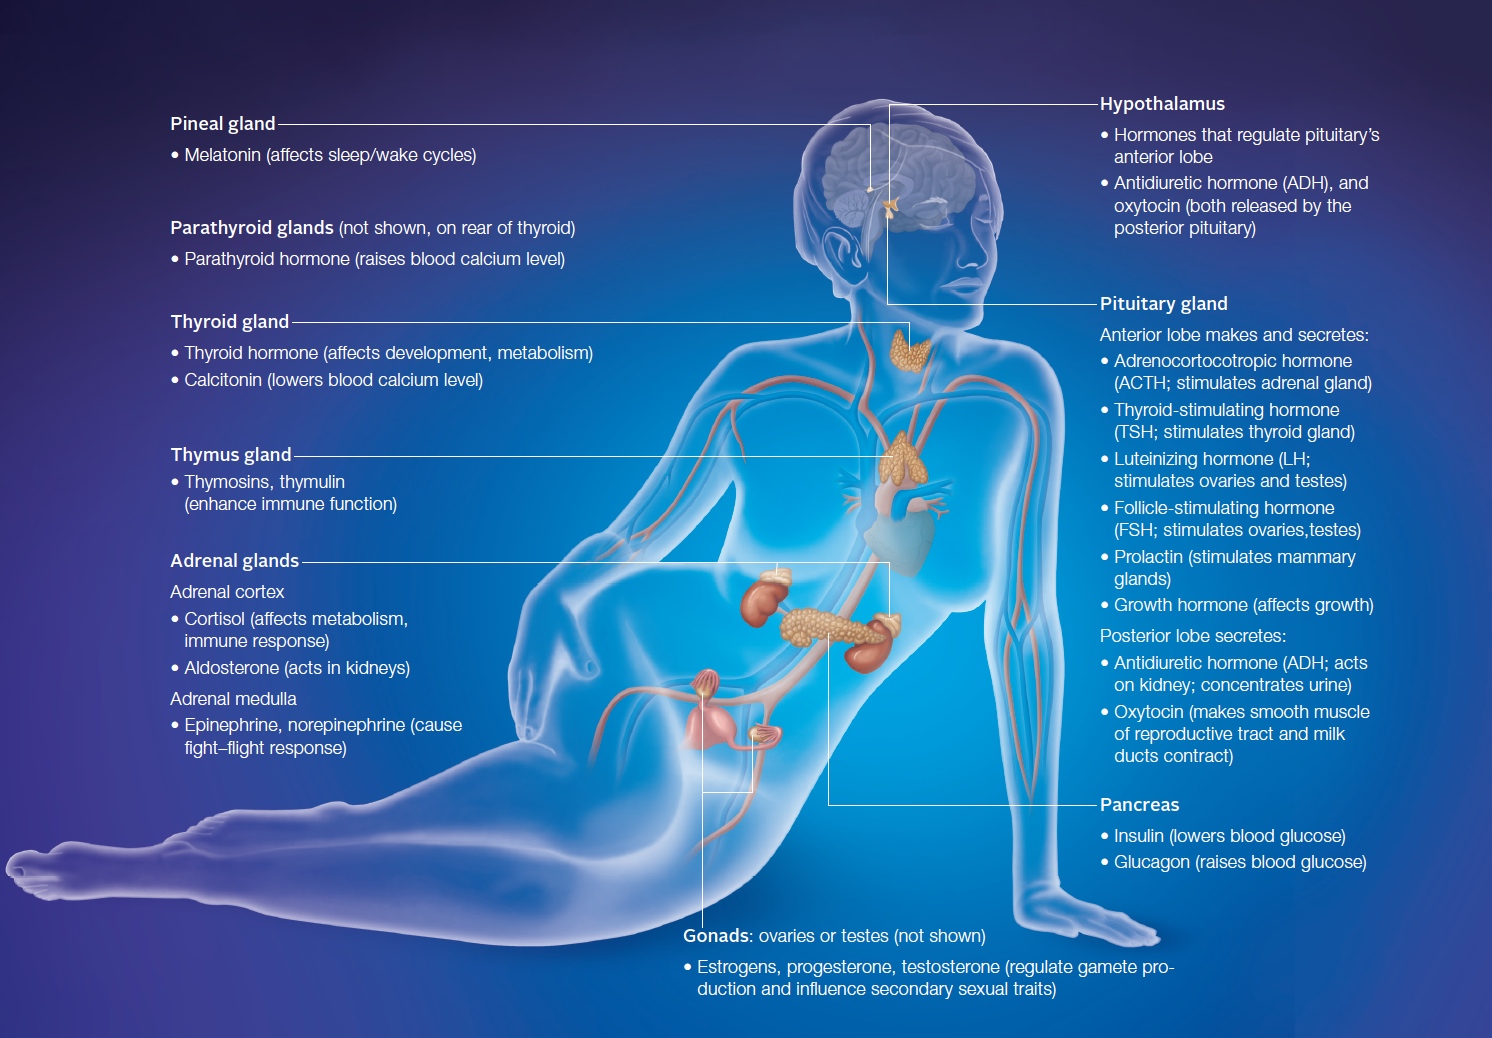 Main components of the human endocrine system and the effects of their secretions